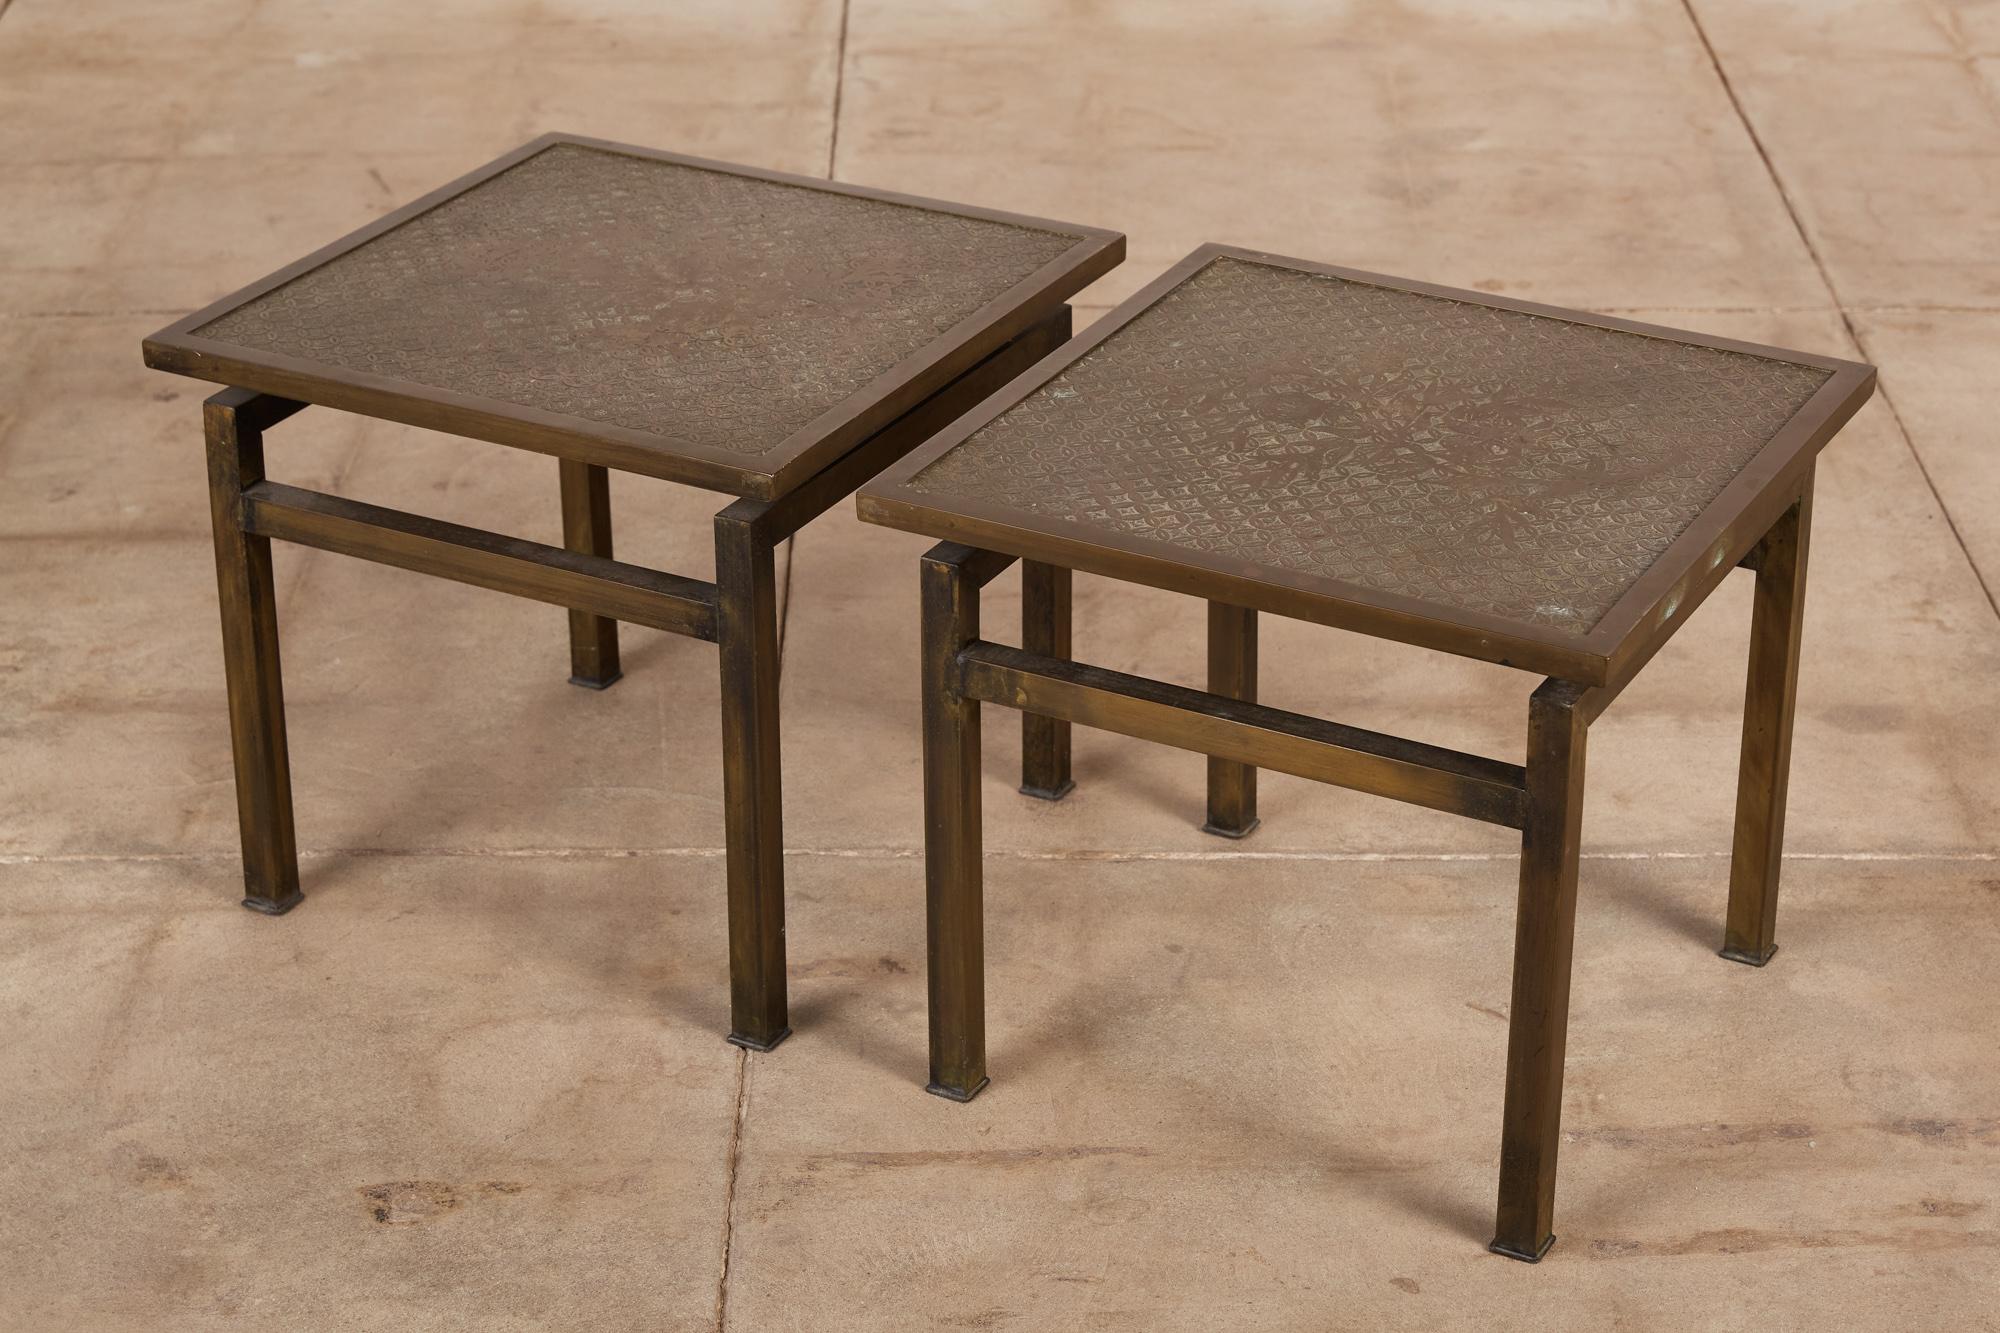 A pair of highly collectible side tables by Philip and Kelvin Laverne. The square shaped tables features their signature acid etched motif pattern on the tabletop that is floated above four four square patinated bronze legs with two horizontal